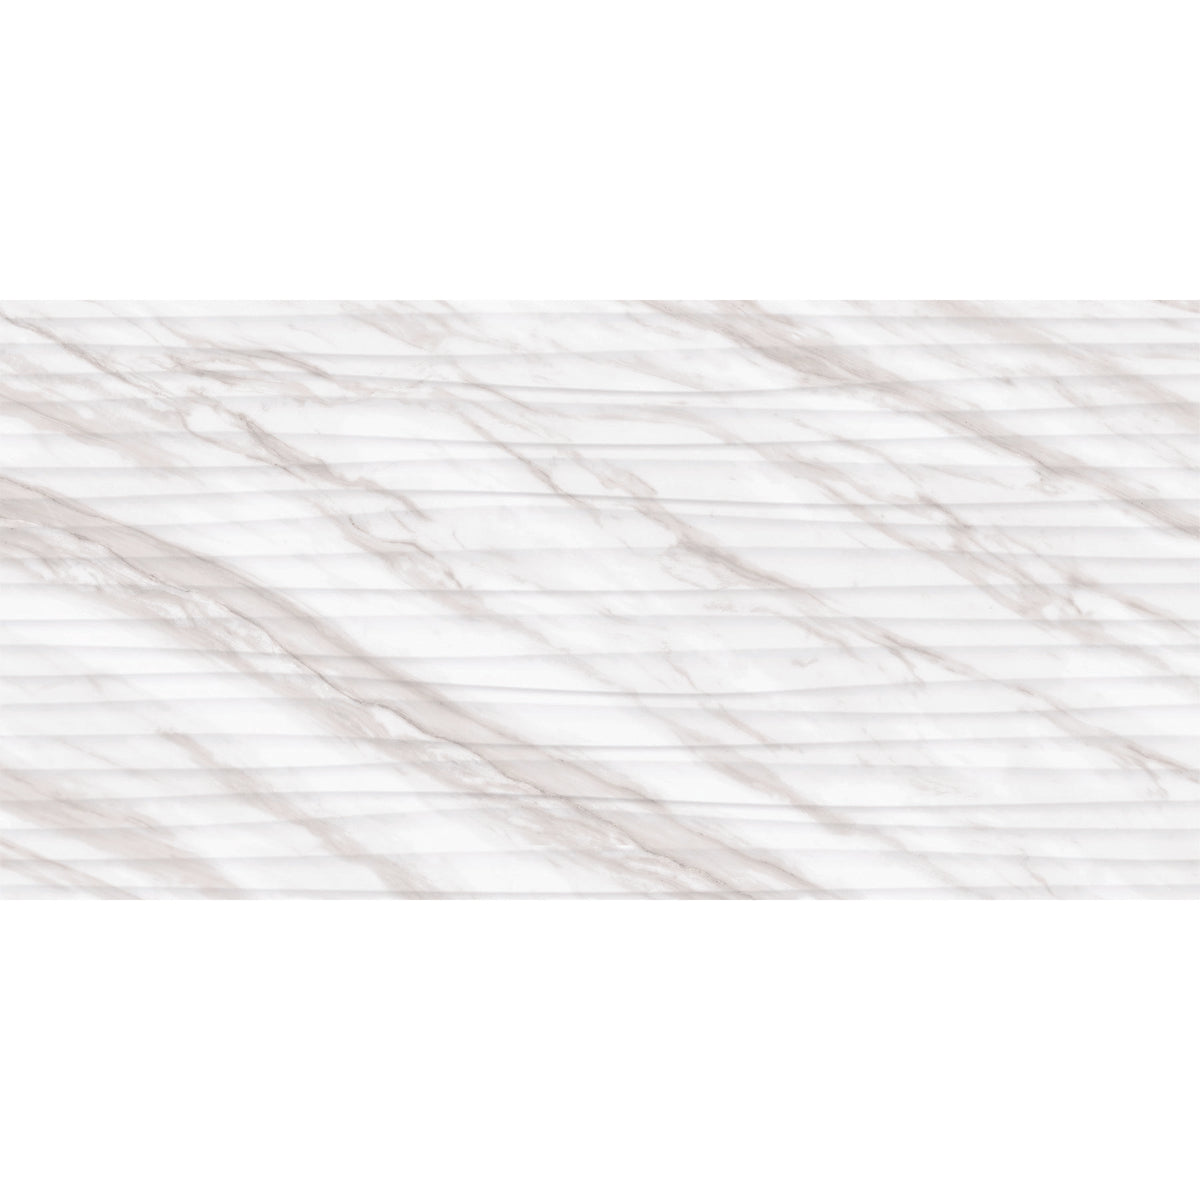 Daltile - Perpetuo - 12 in. x 24 in. Glazed Ceramic Wave Wall Tile - Timeless White 4